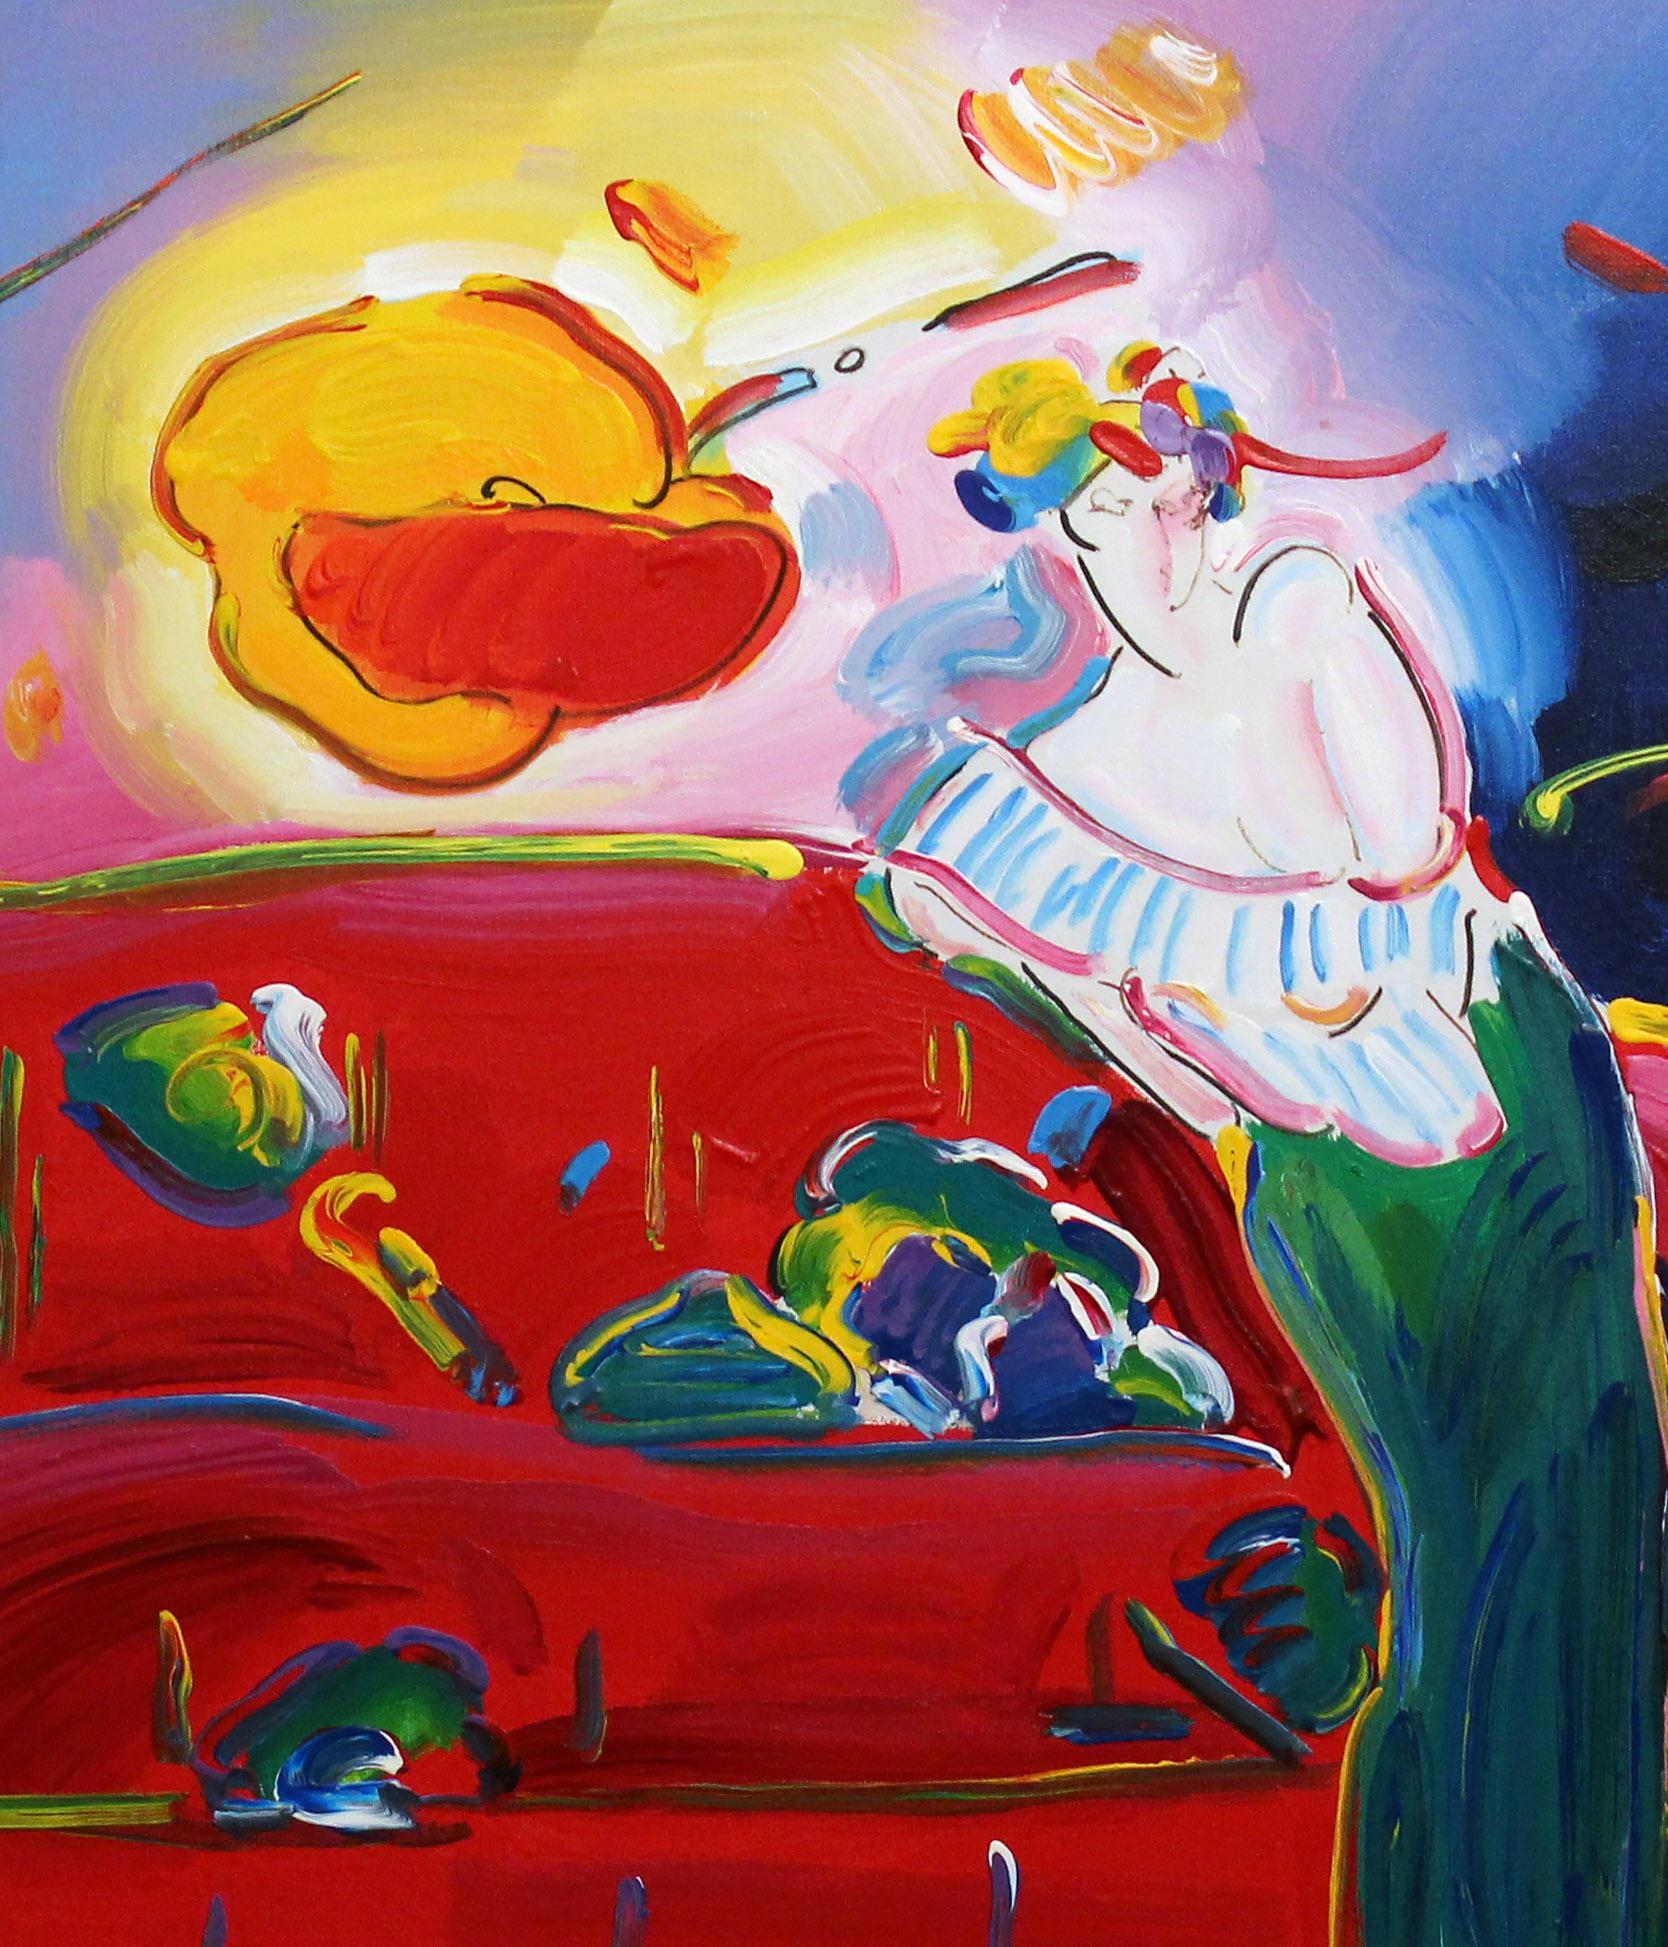 This is a one of a kind large unique painting by Peter Max which depicts a woman posed by a couch.

This is a fully finished composition where every inch of the canvas was addressed in detail.

This work was purchased from the artist himself and